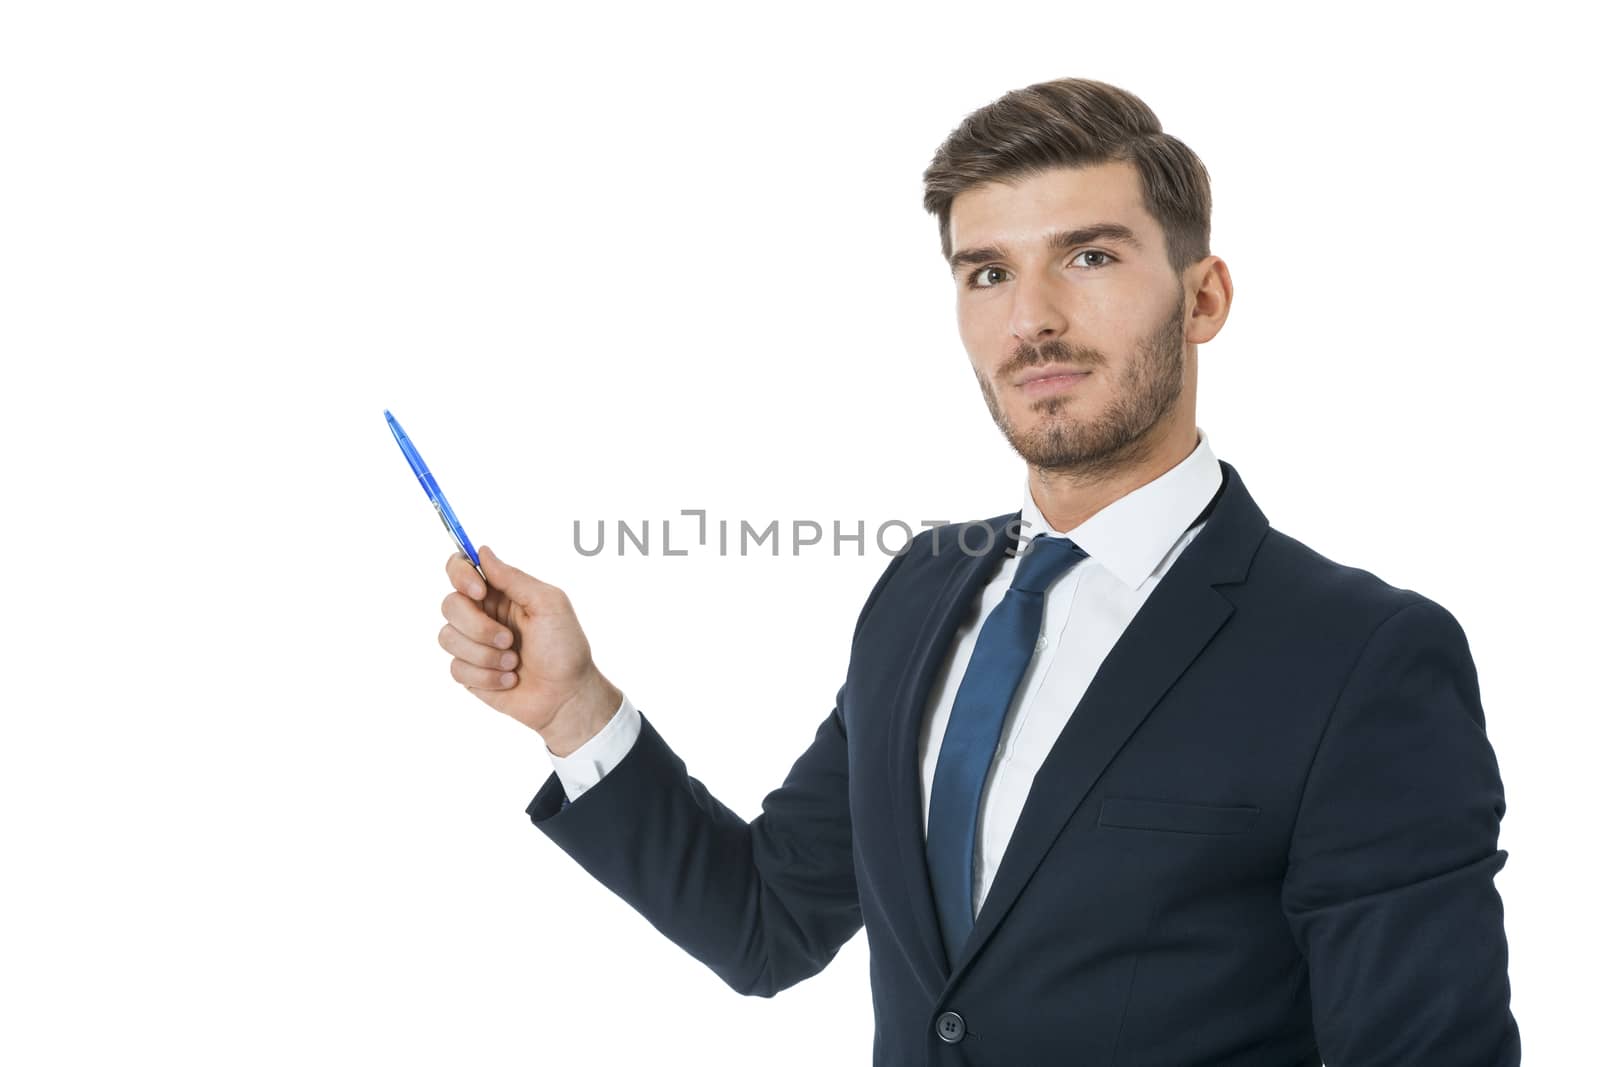 Stylish young businessman doing a presentation, making a selection or showing something pointing to the left of the frame with a pen in his hand as he stands sideways to the camera, isolated on white